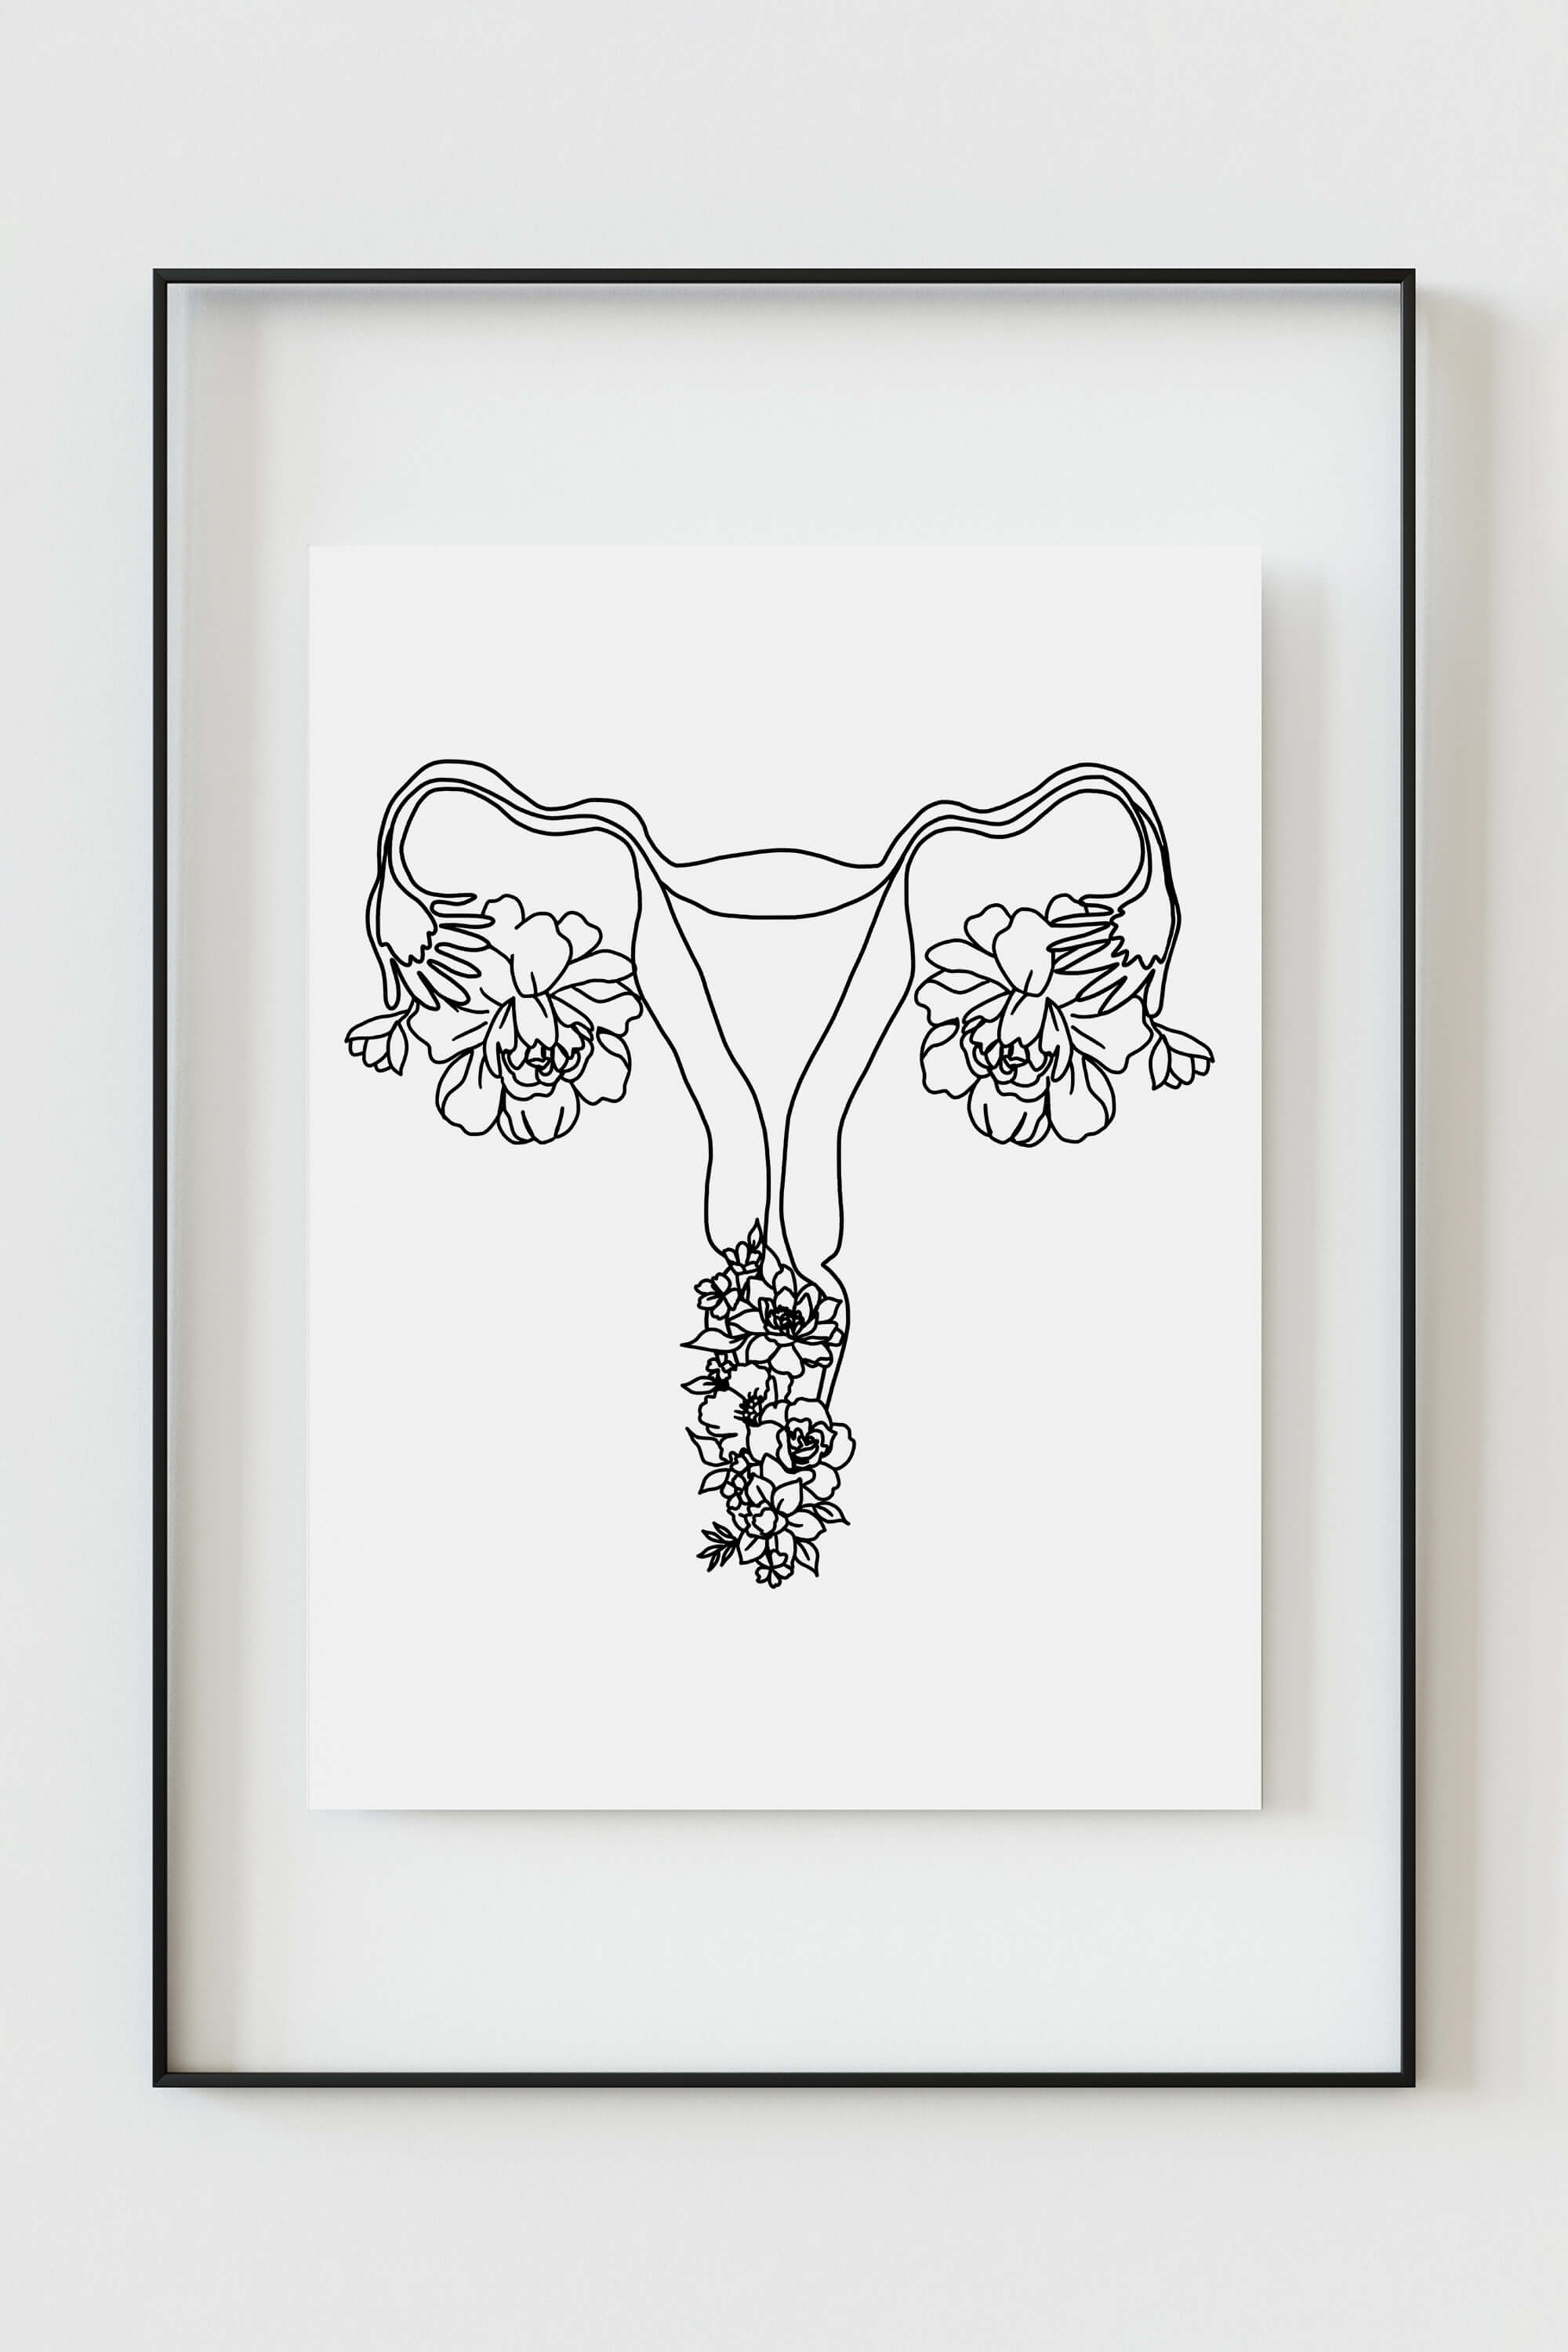 Pregnancy Announcement Gift - Floral Anatomy Illustration. This elegant artwork captures the essence of new life with a harmonious blend of delicate florals and uterine symbolism.